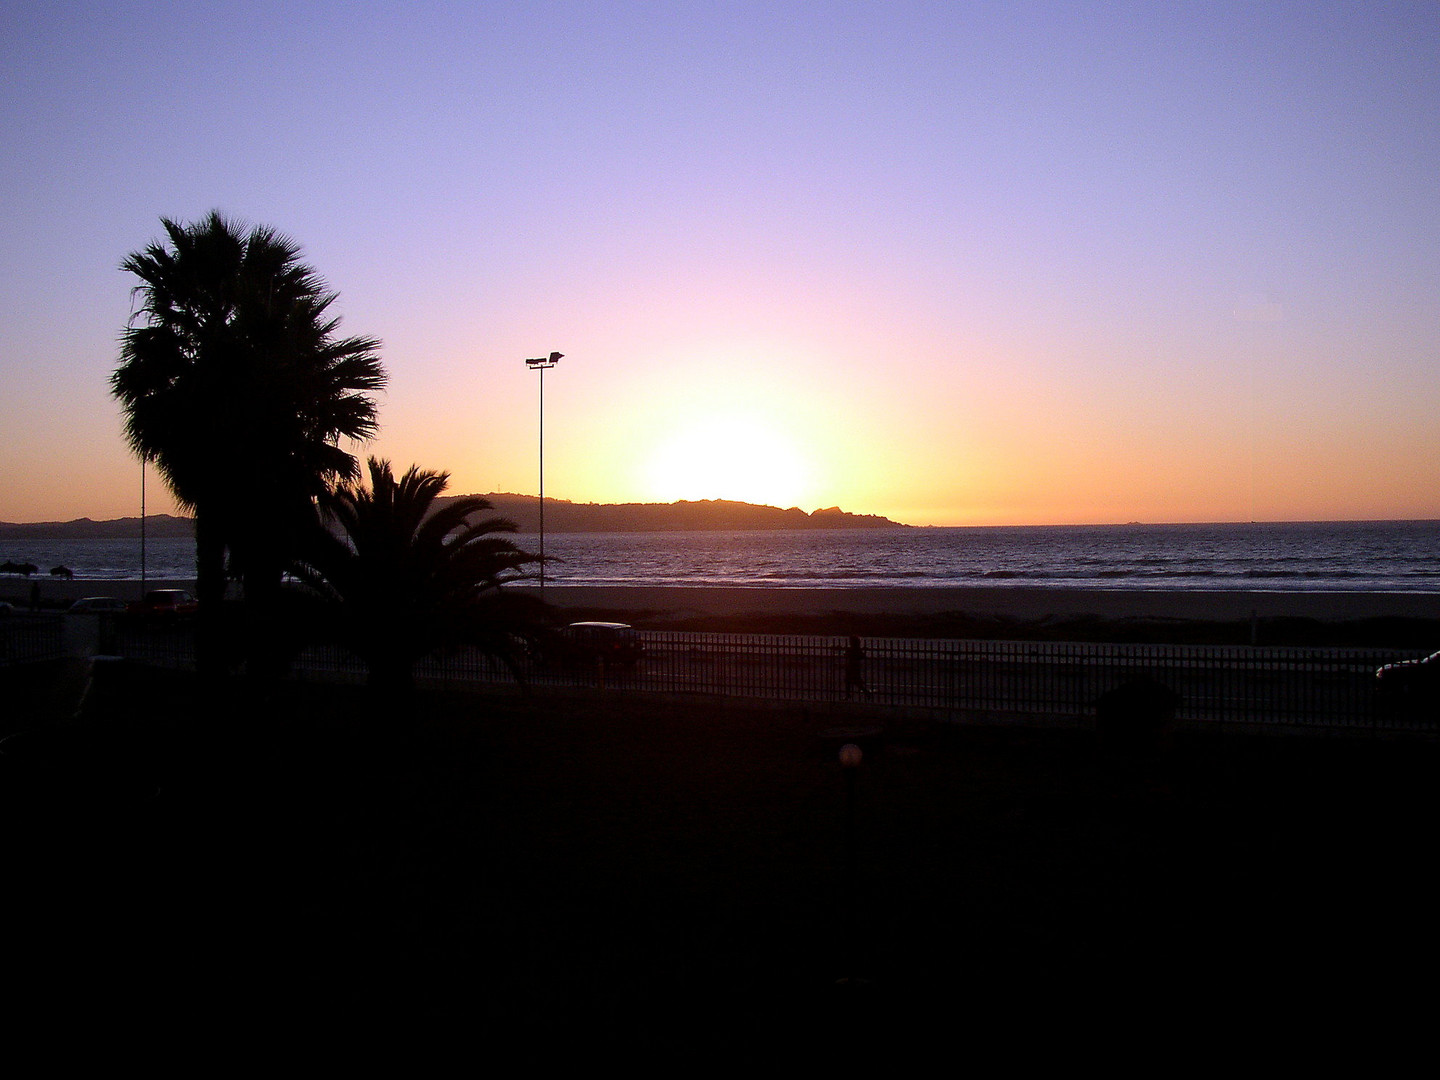 Pacific-Coast-Sunset an der PanAmericana in Coquimbo/Chile